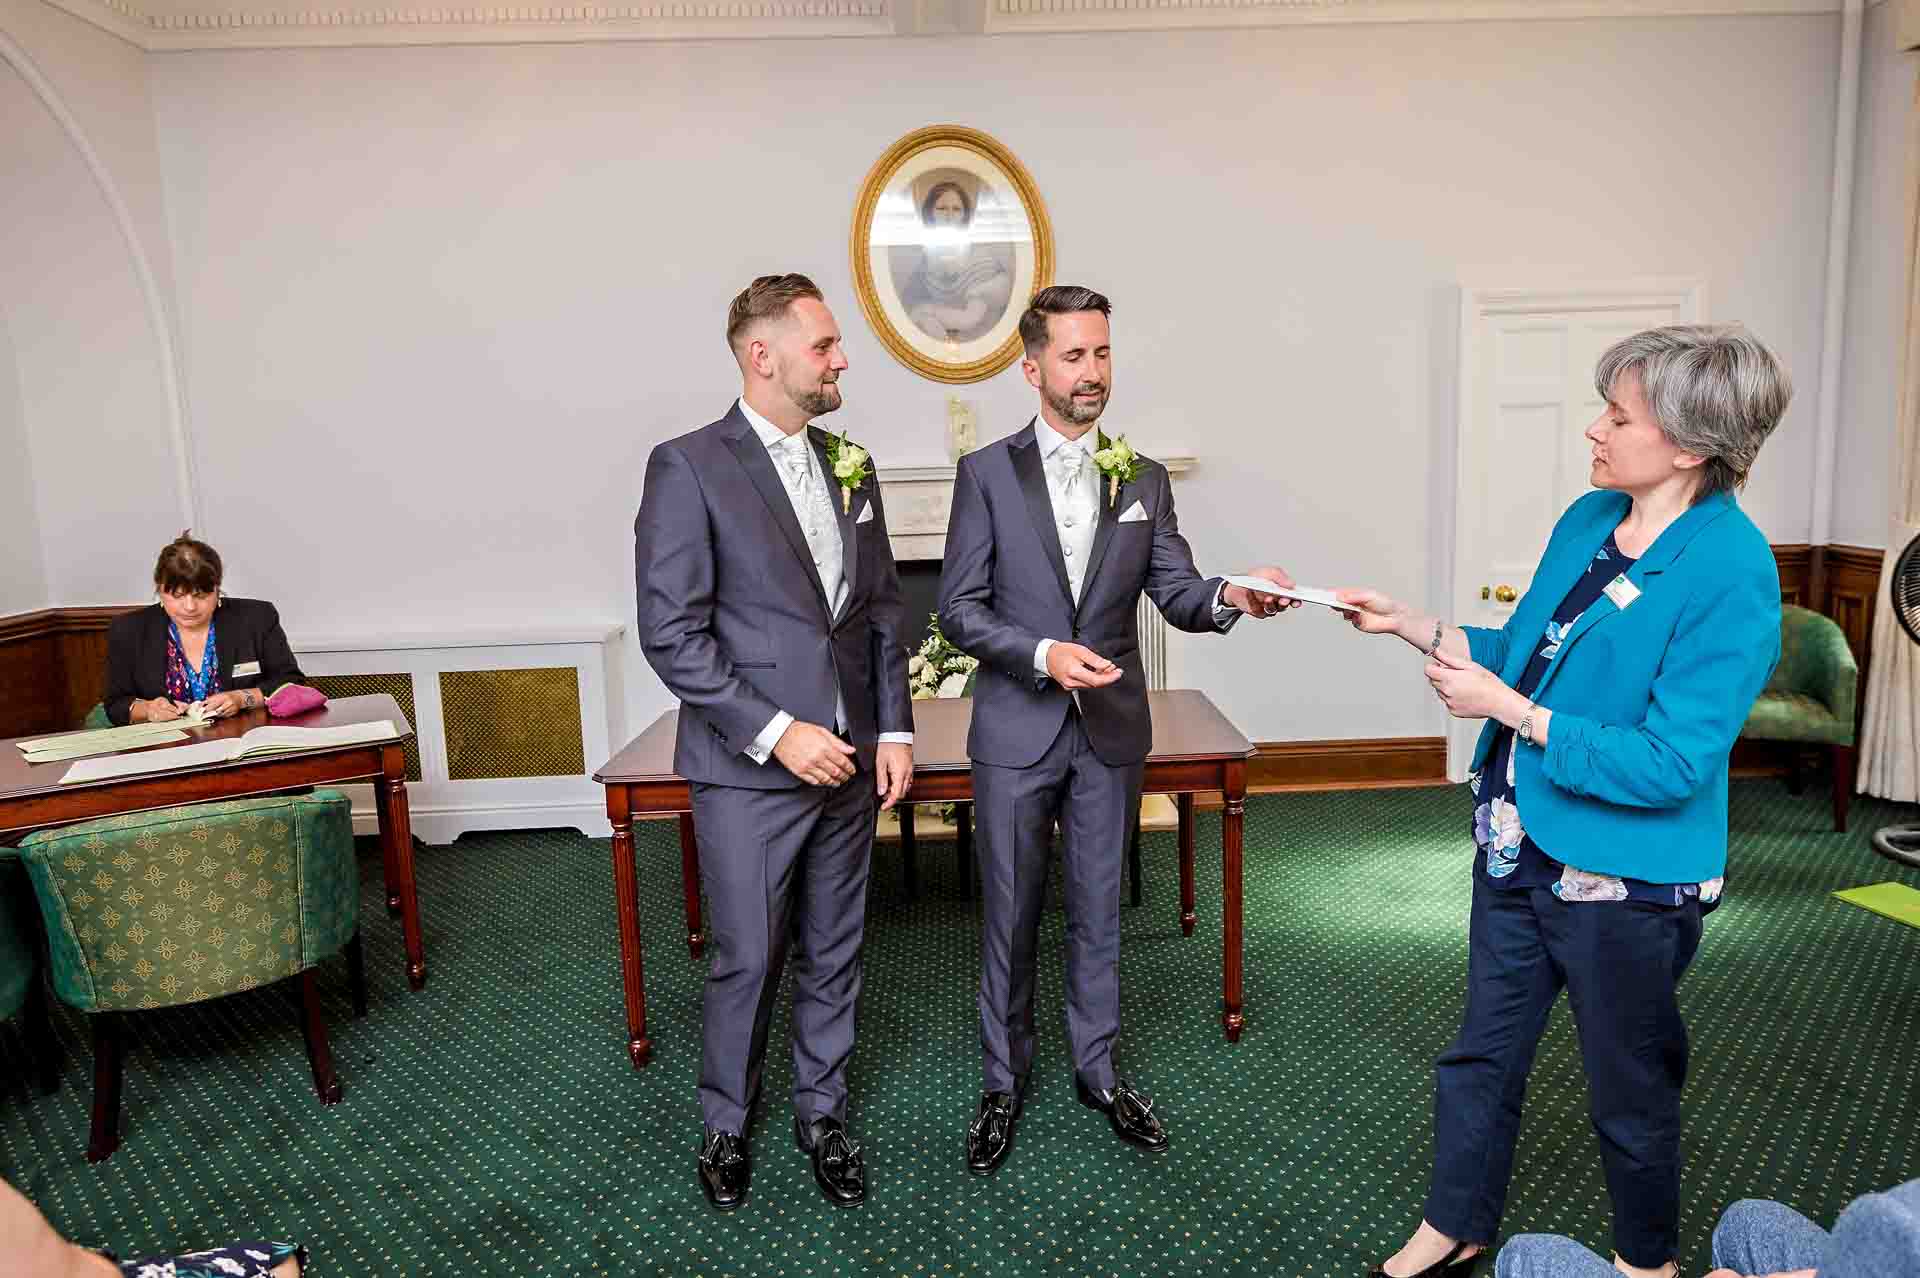 Registrar presenting certificate to couple at register office wedding